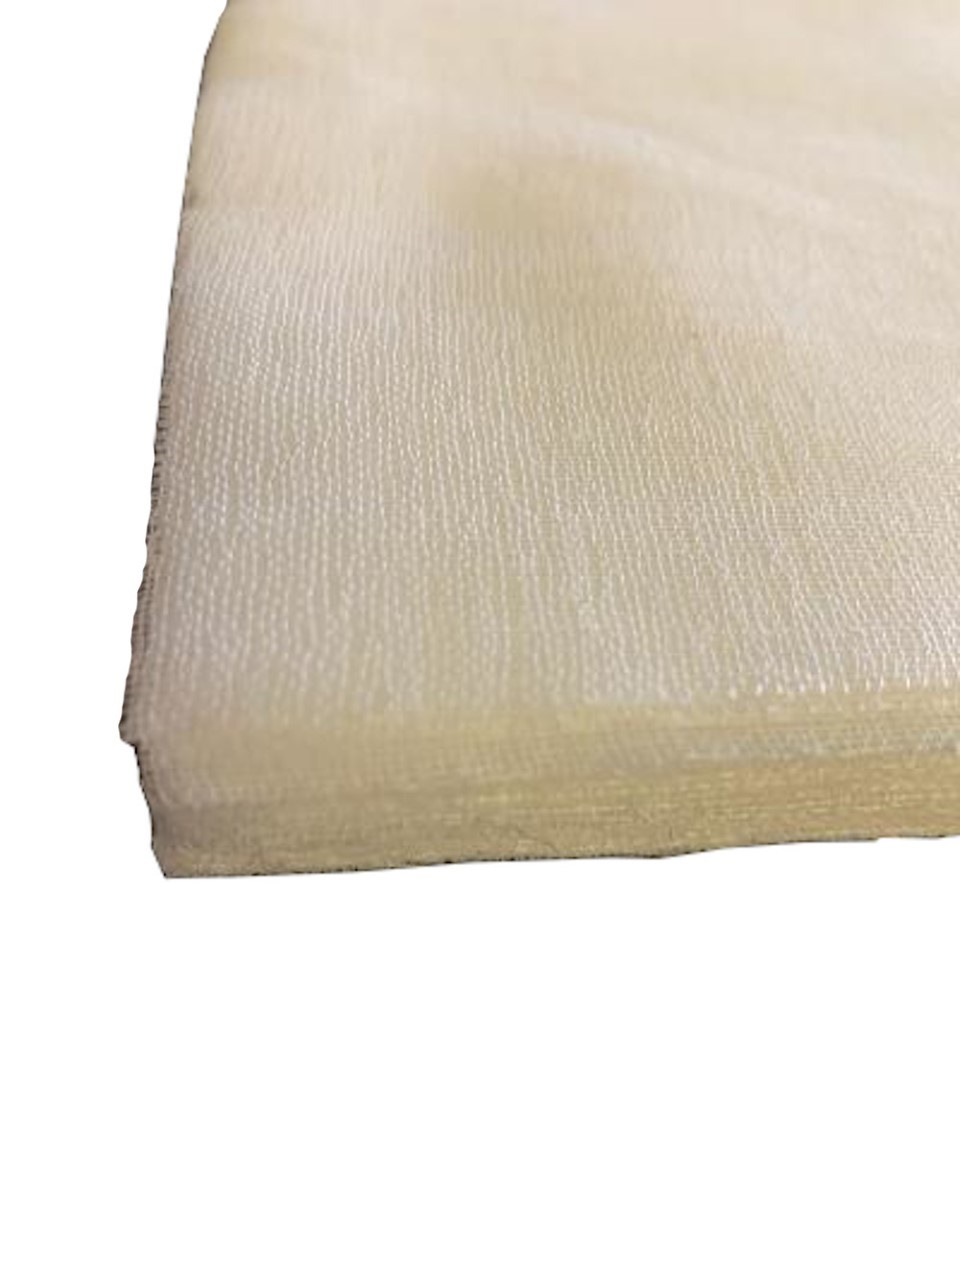 Grade 90 White Cheesecloth - 6" x 6" Squares (100 Pack)